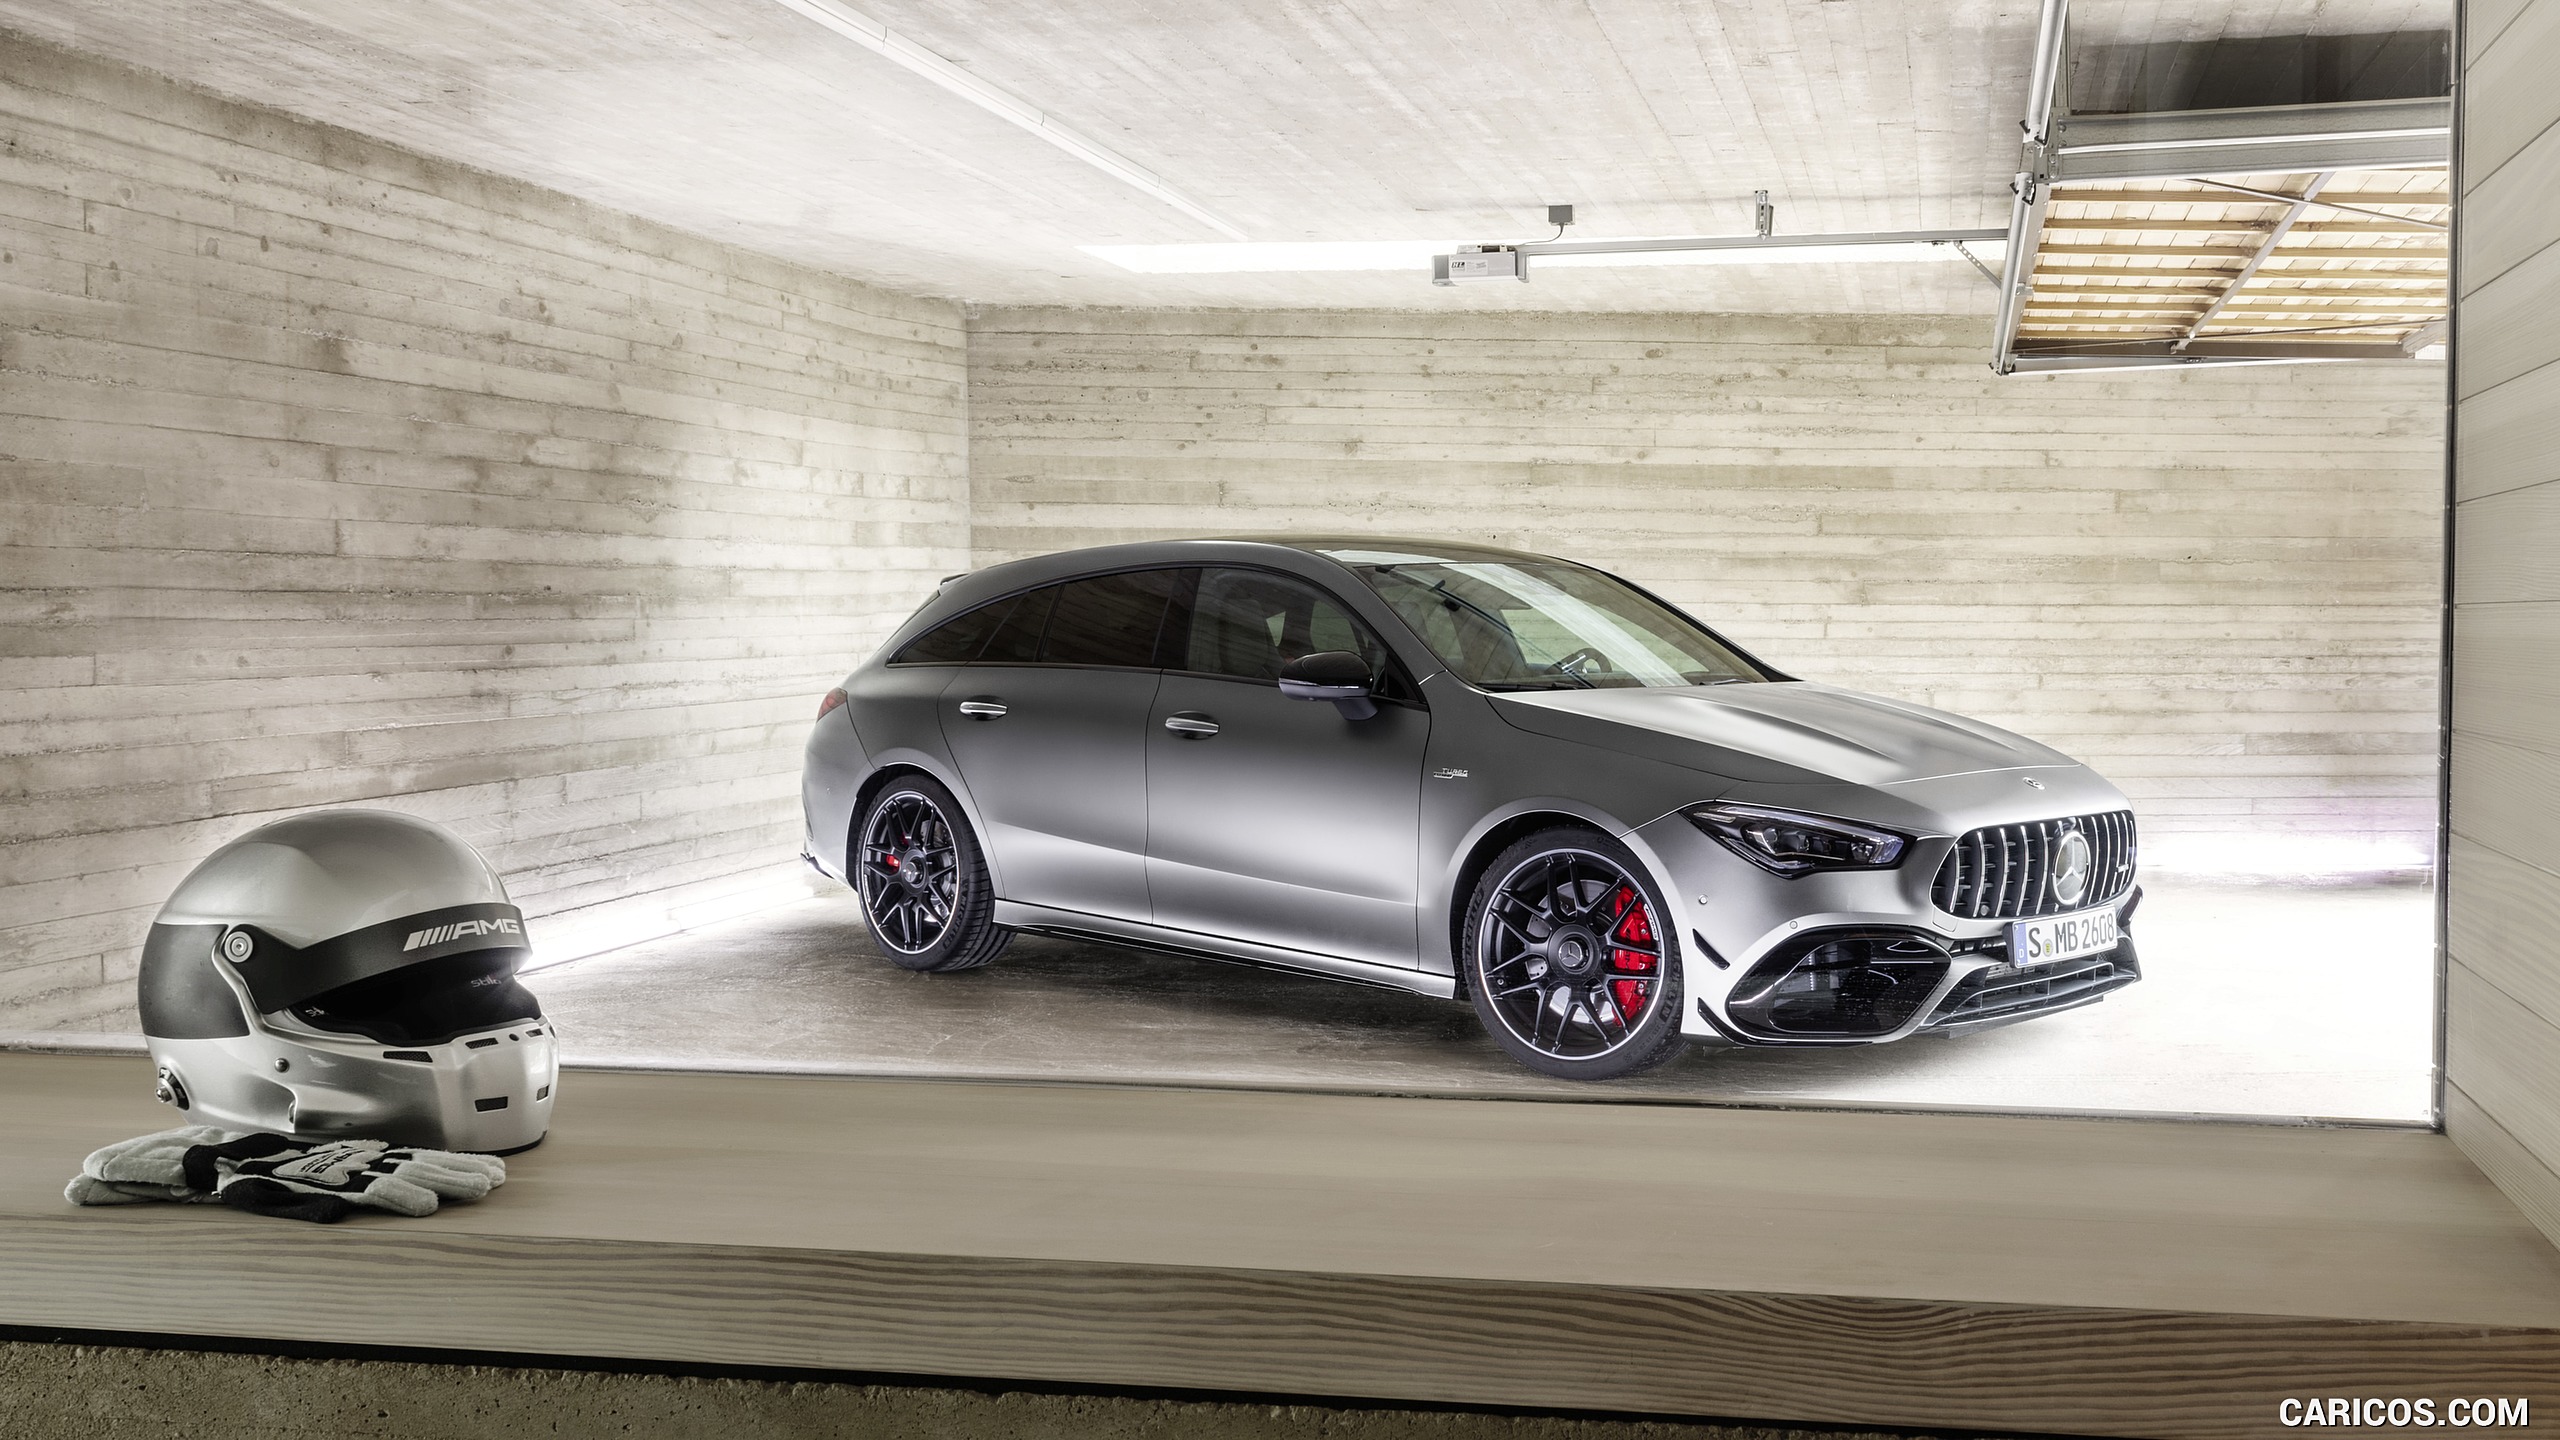 2020 Mercedes-AMG CLA 45 S 4MATIC+ Shooting Brake - Front Three-Quarter, #23 of 35